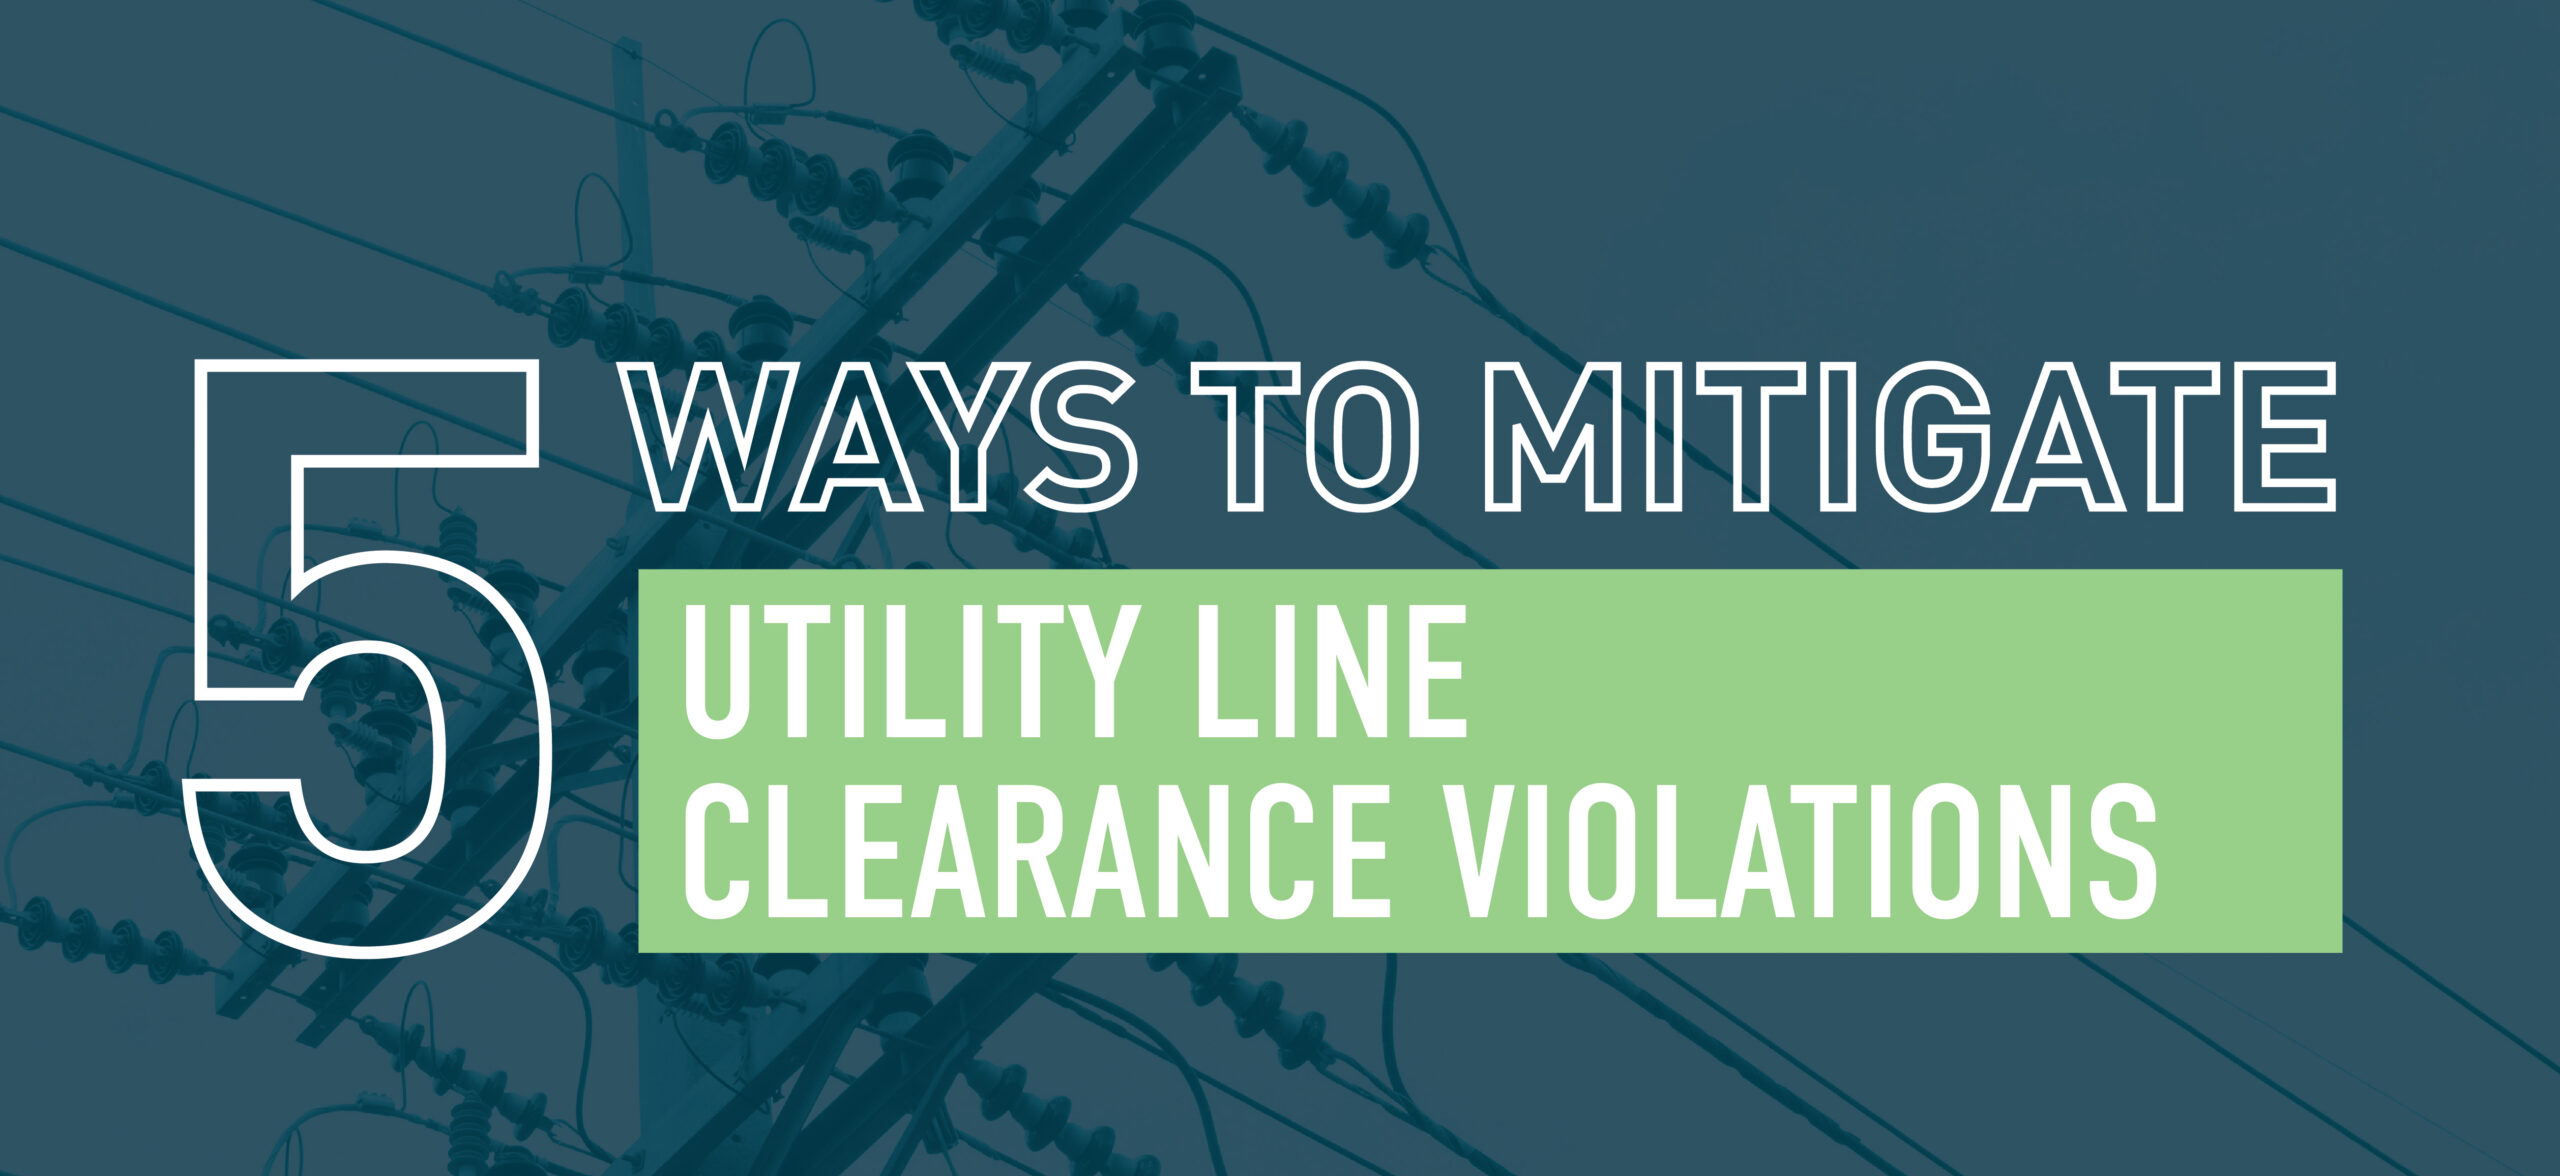 5 Ways to Mitigate Utility Line Clearance Violations